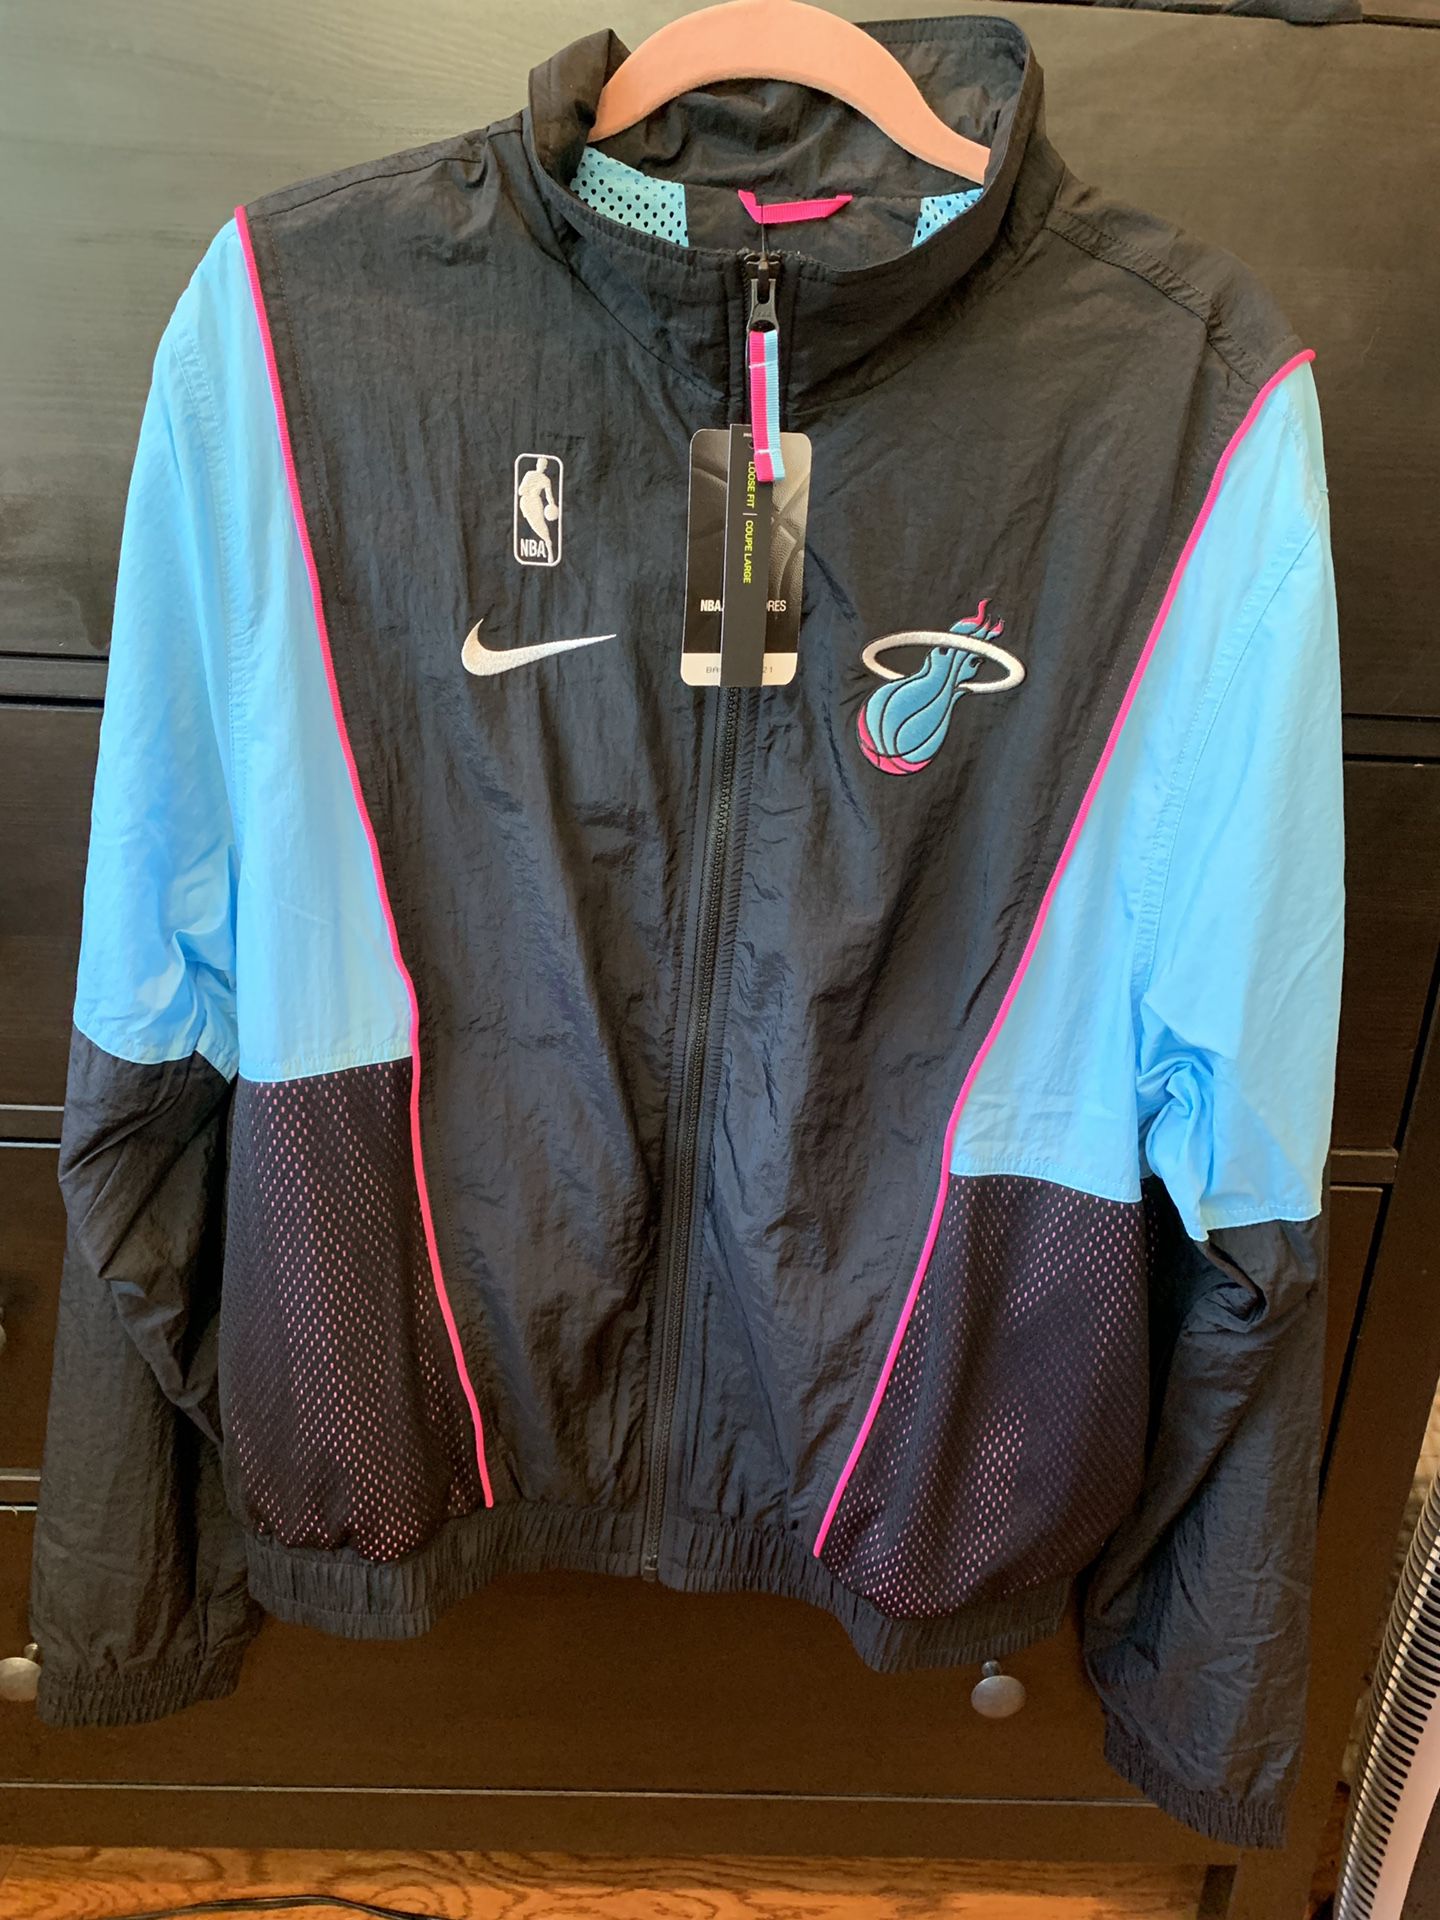 Dwyane Wade Miami Heat Sunset Vice Pink Earned Edition Jersey for Sale in  Cooper City, FL - OfferUp